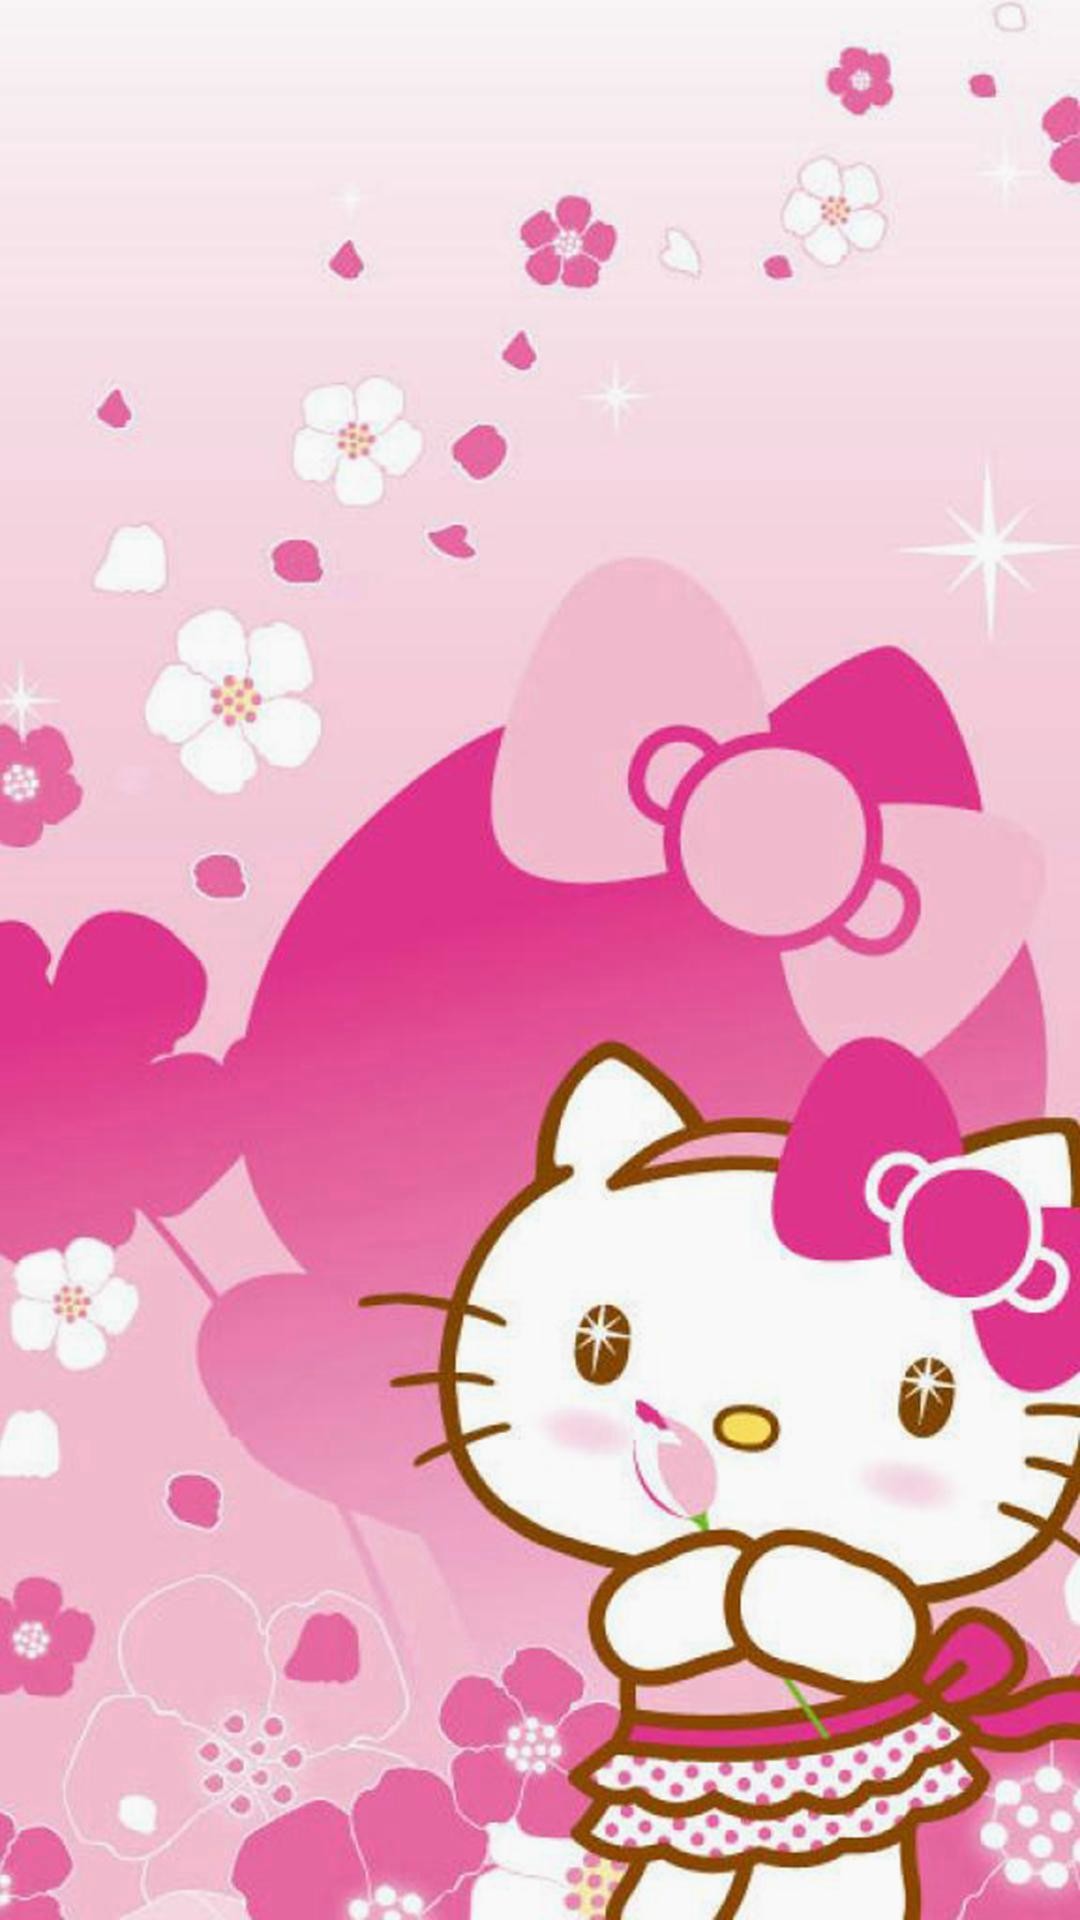 1080x1920 9. hello-kitty-wallpaper-for-android-HD9-338x600